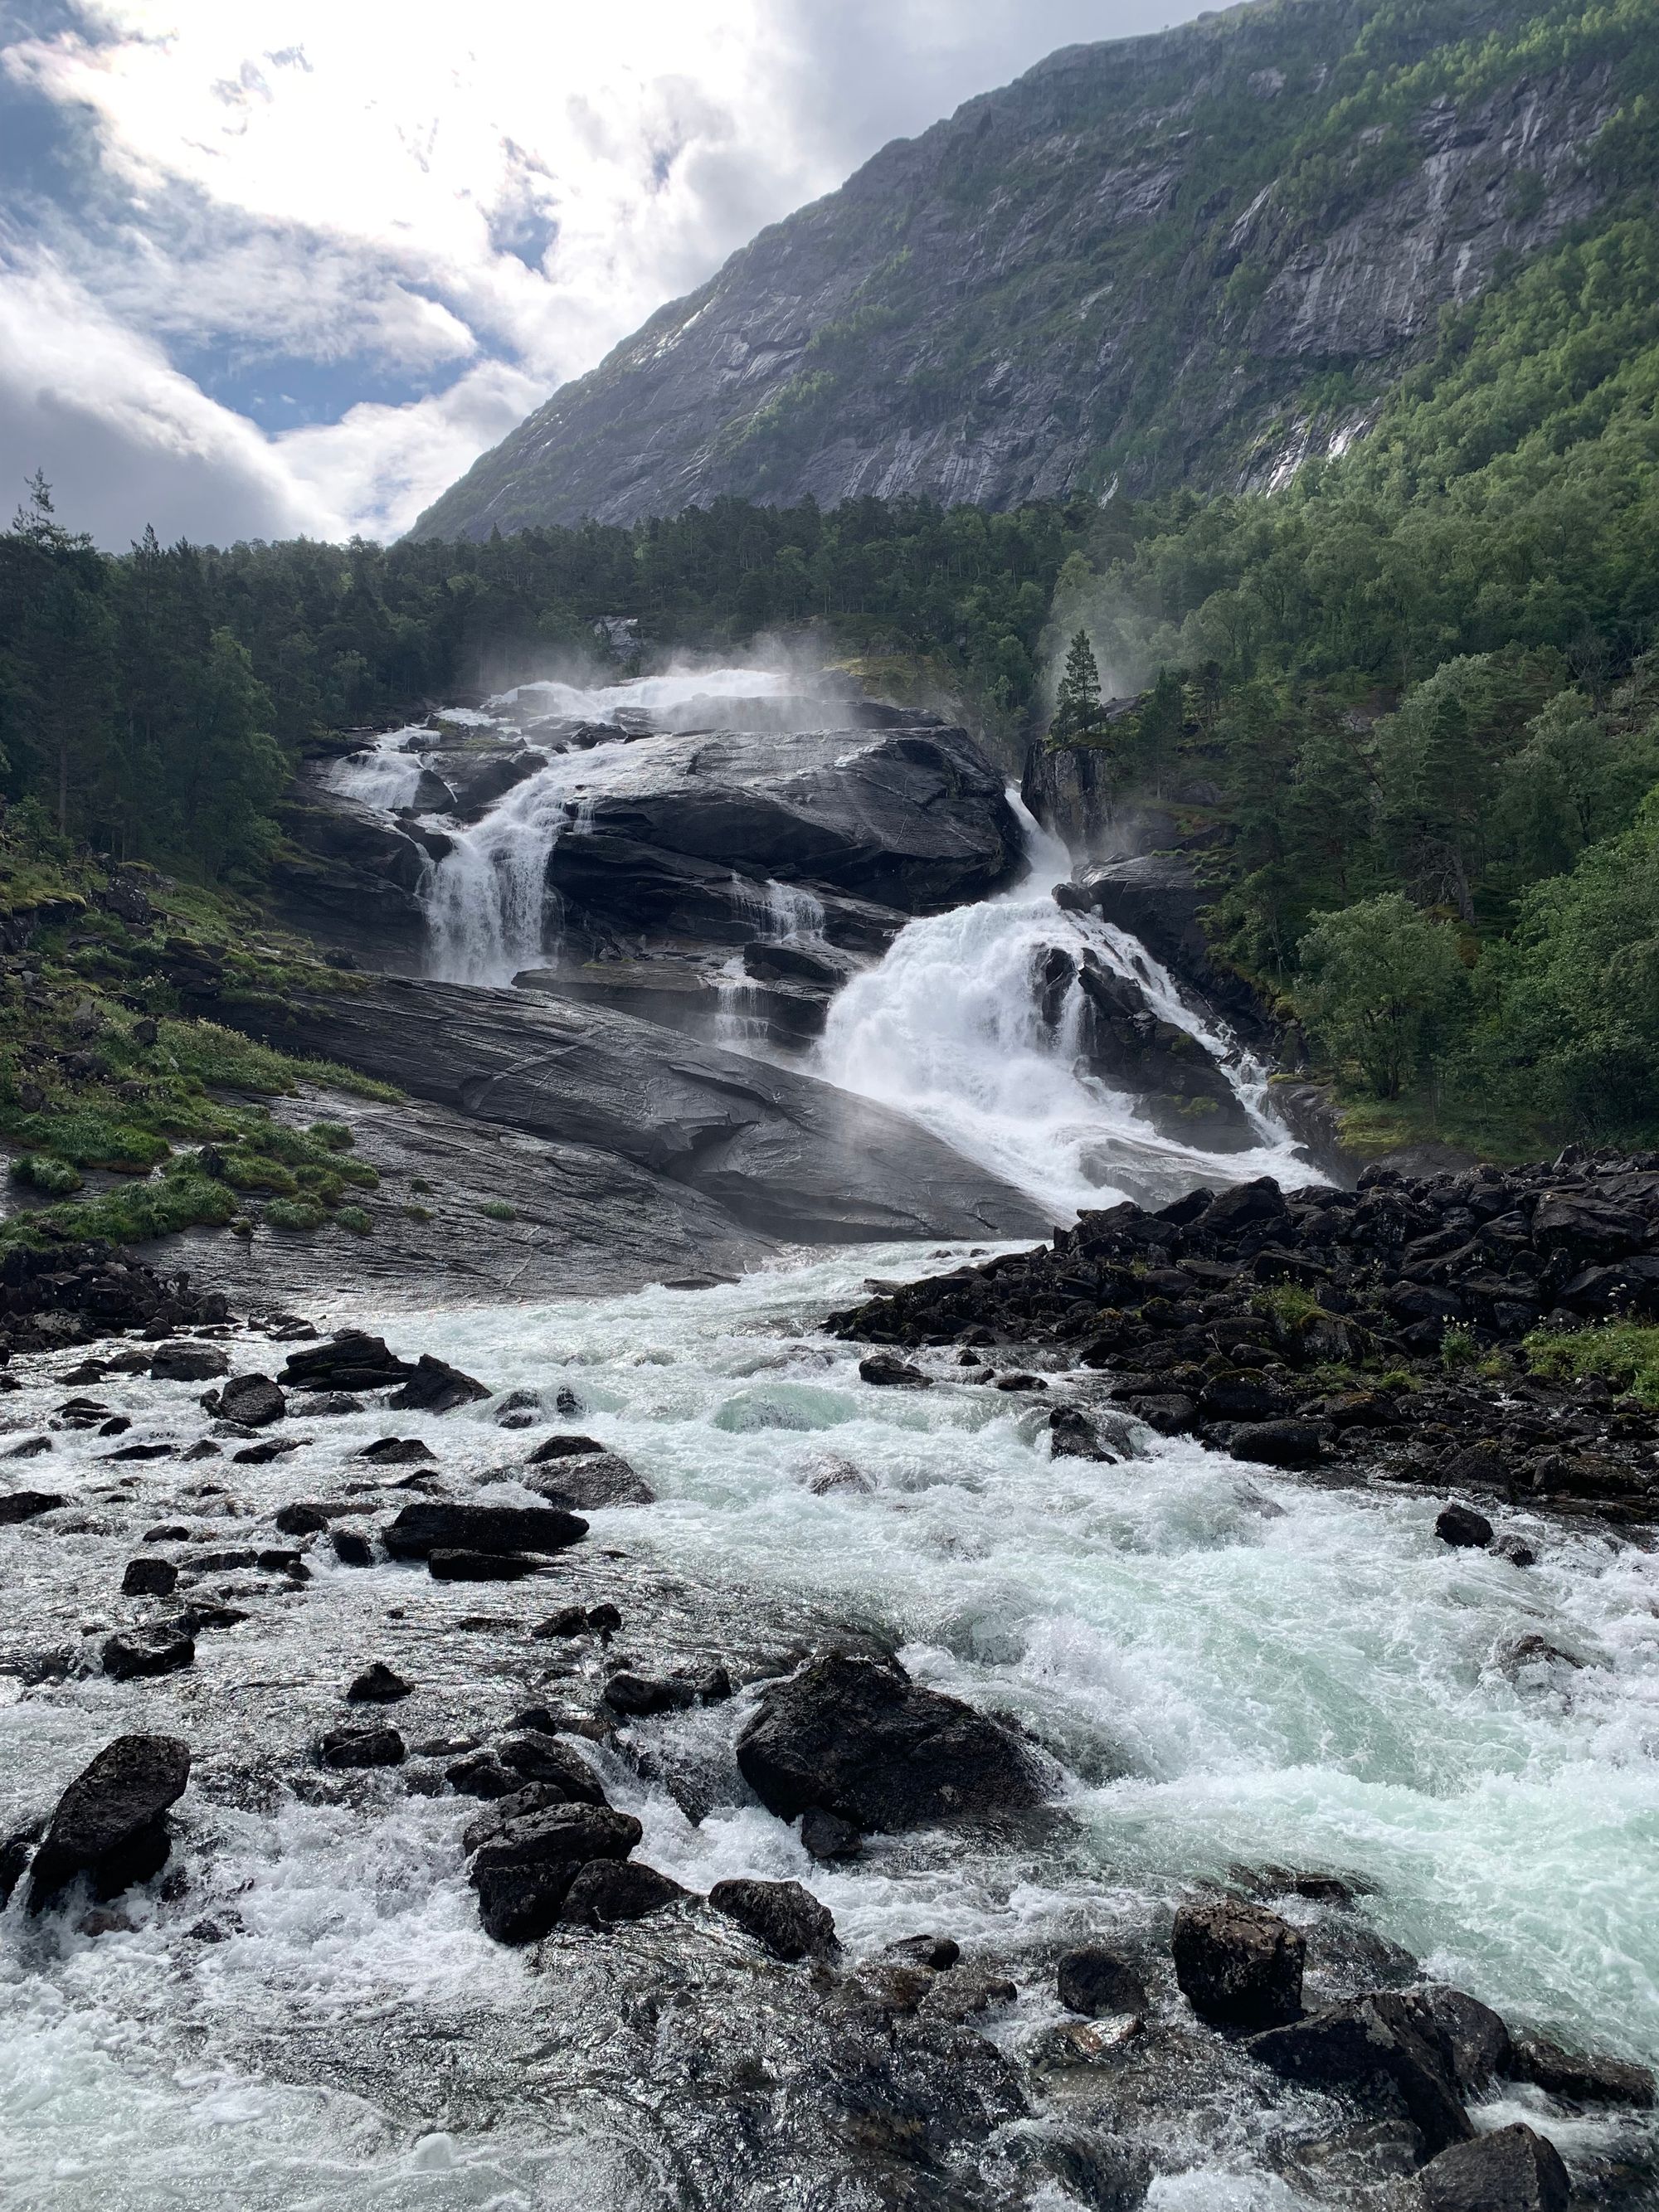 Dramatic waterfalls backed by deep green forest in the Norwegian fjords.